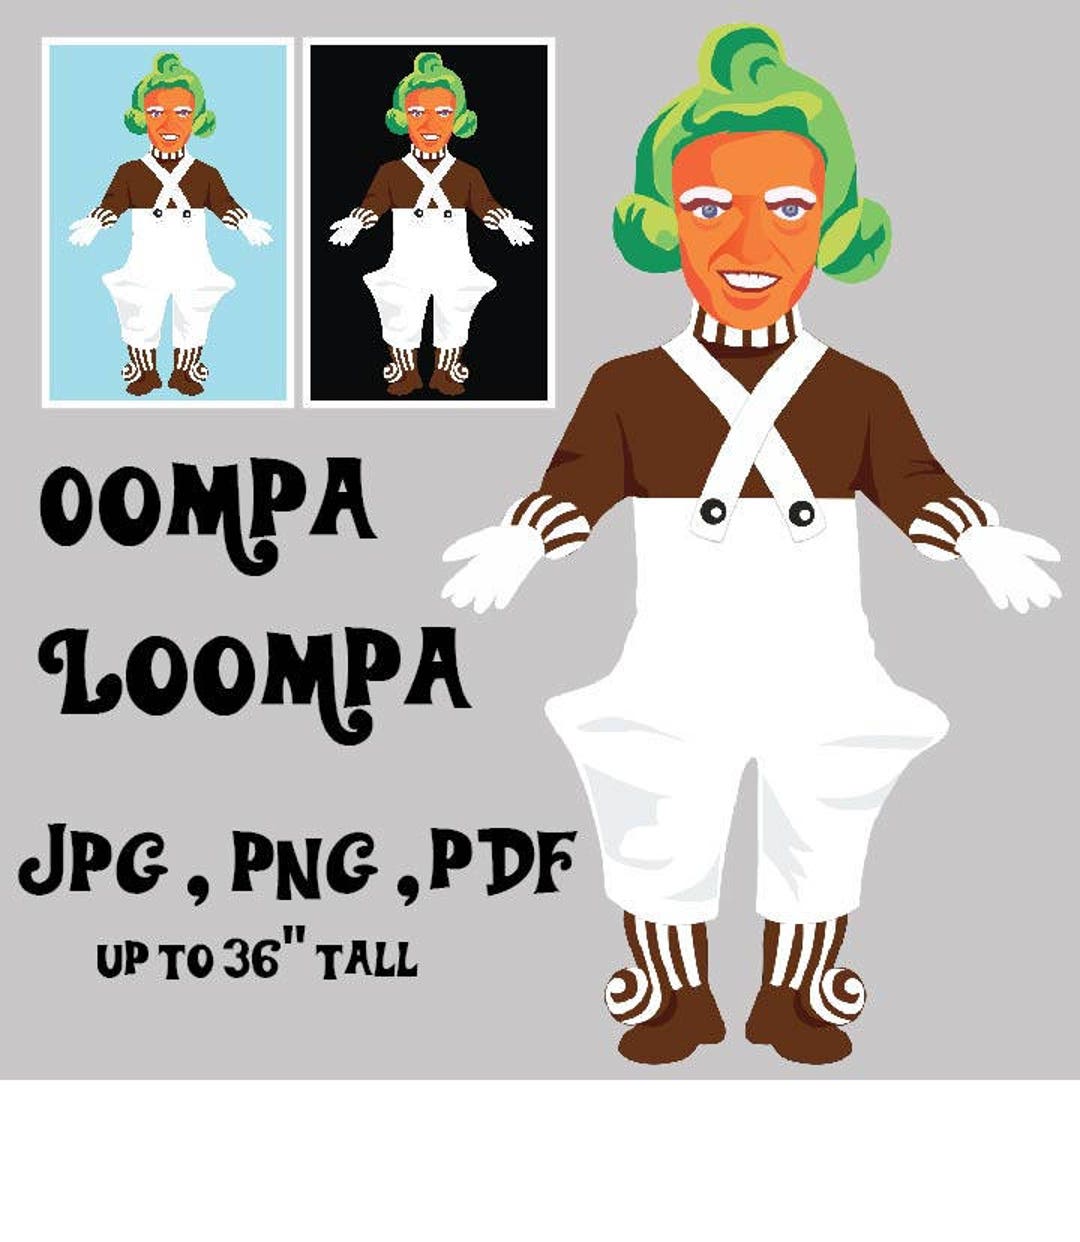 Hi Resolution Oompa Loompa Candy Maker Willy Wonka Clip pic